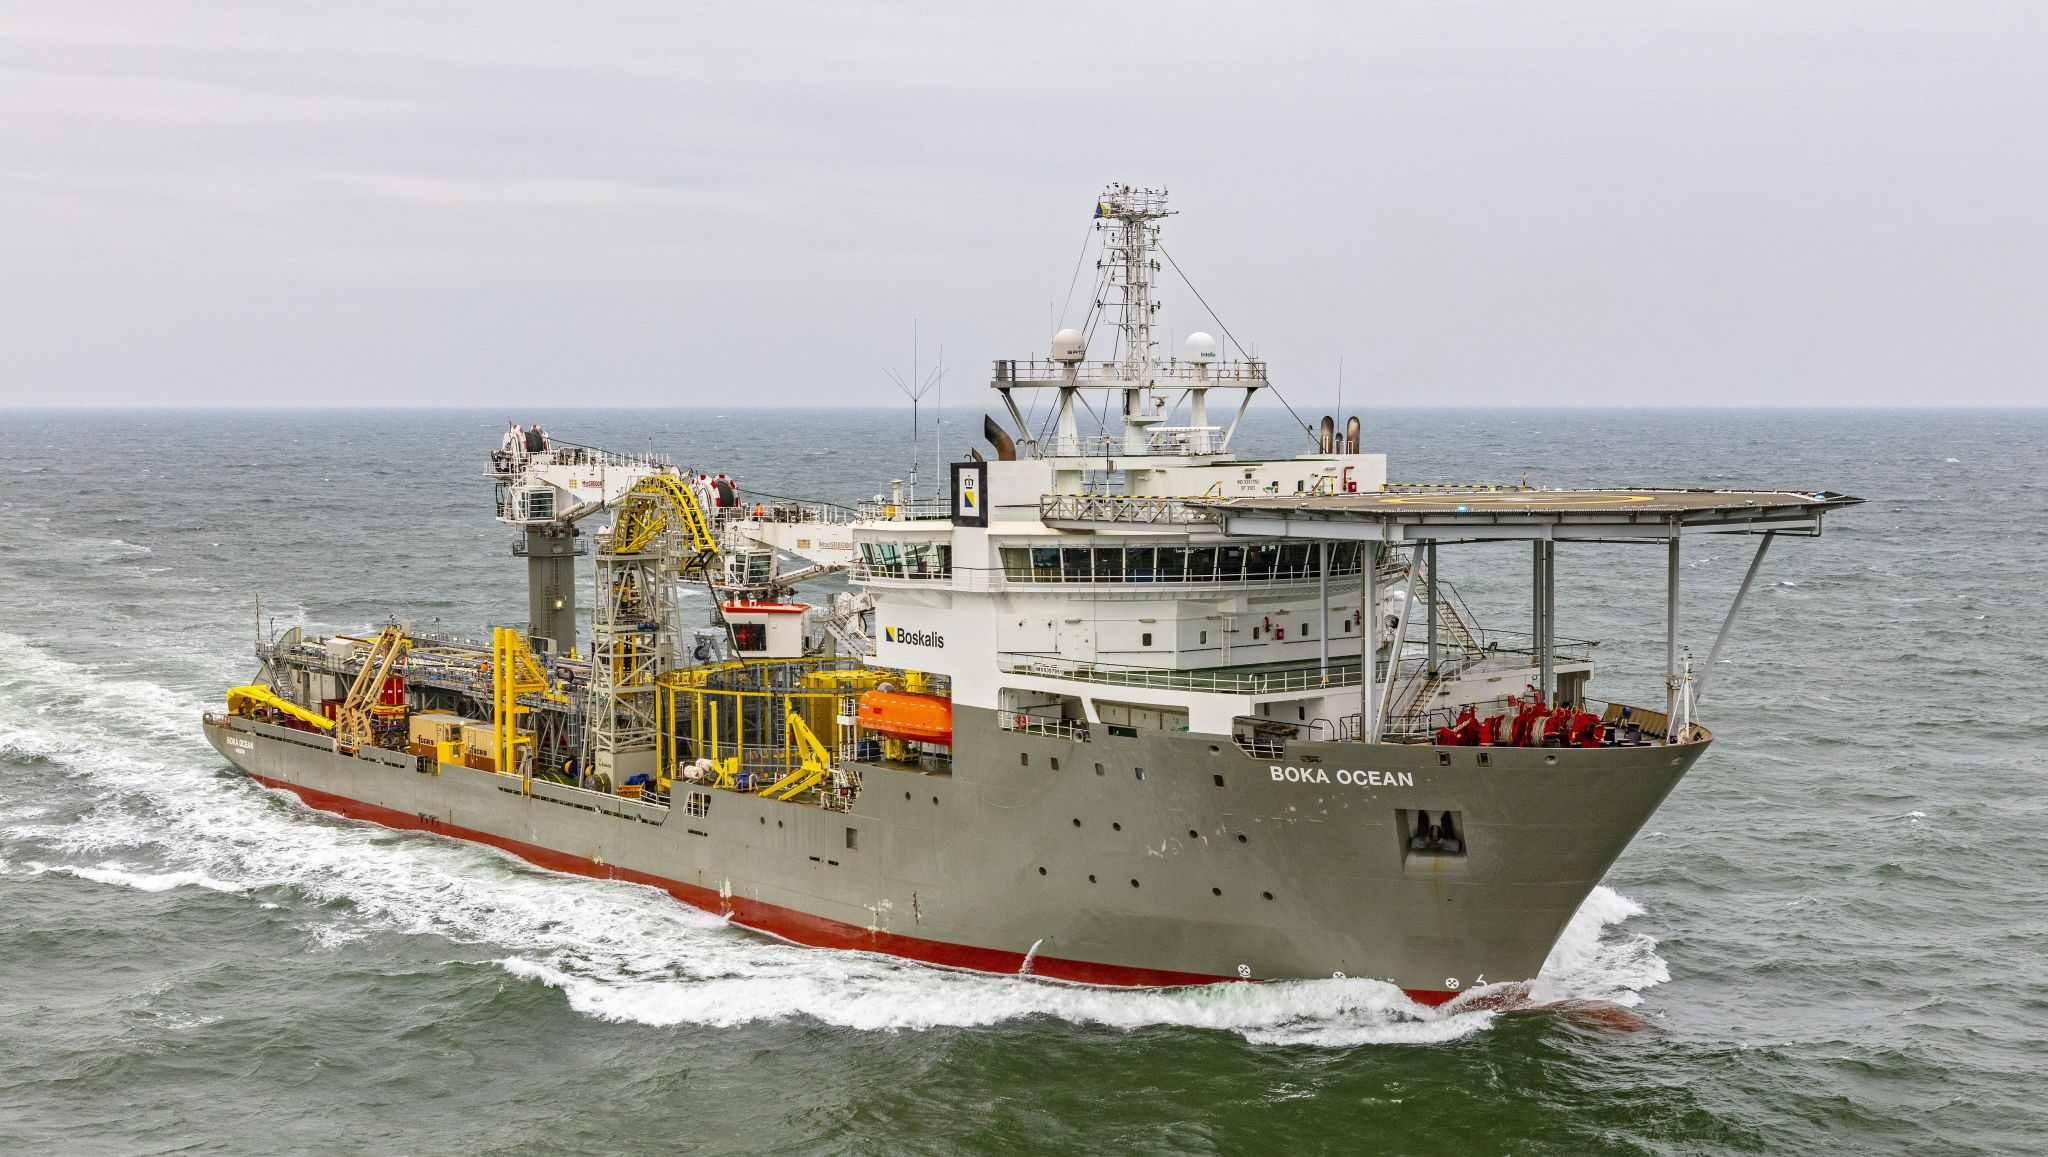 New cable layer joins Boskalis fleet following major conversion